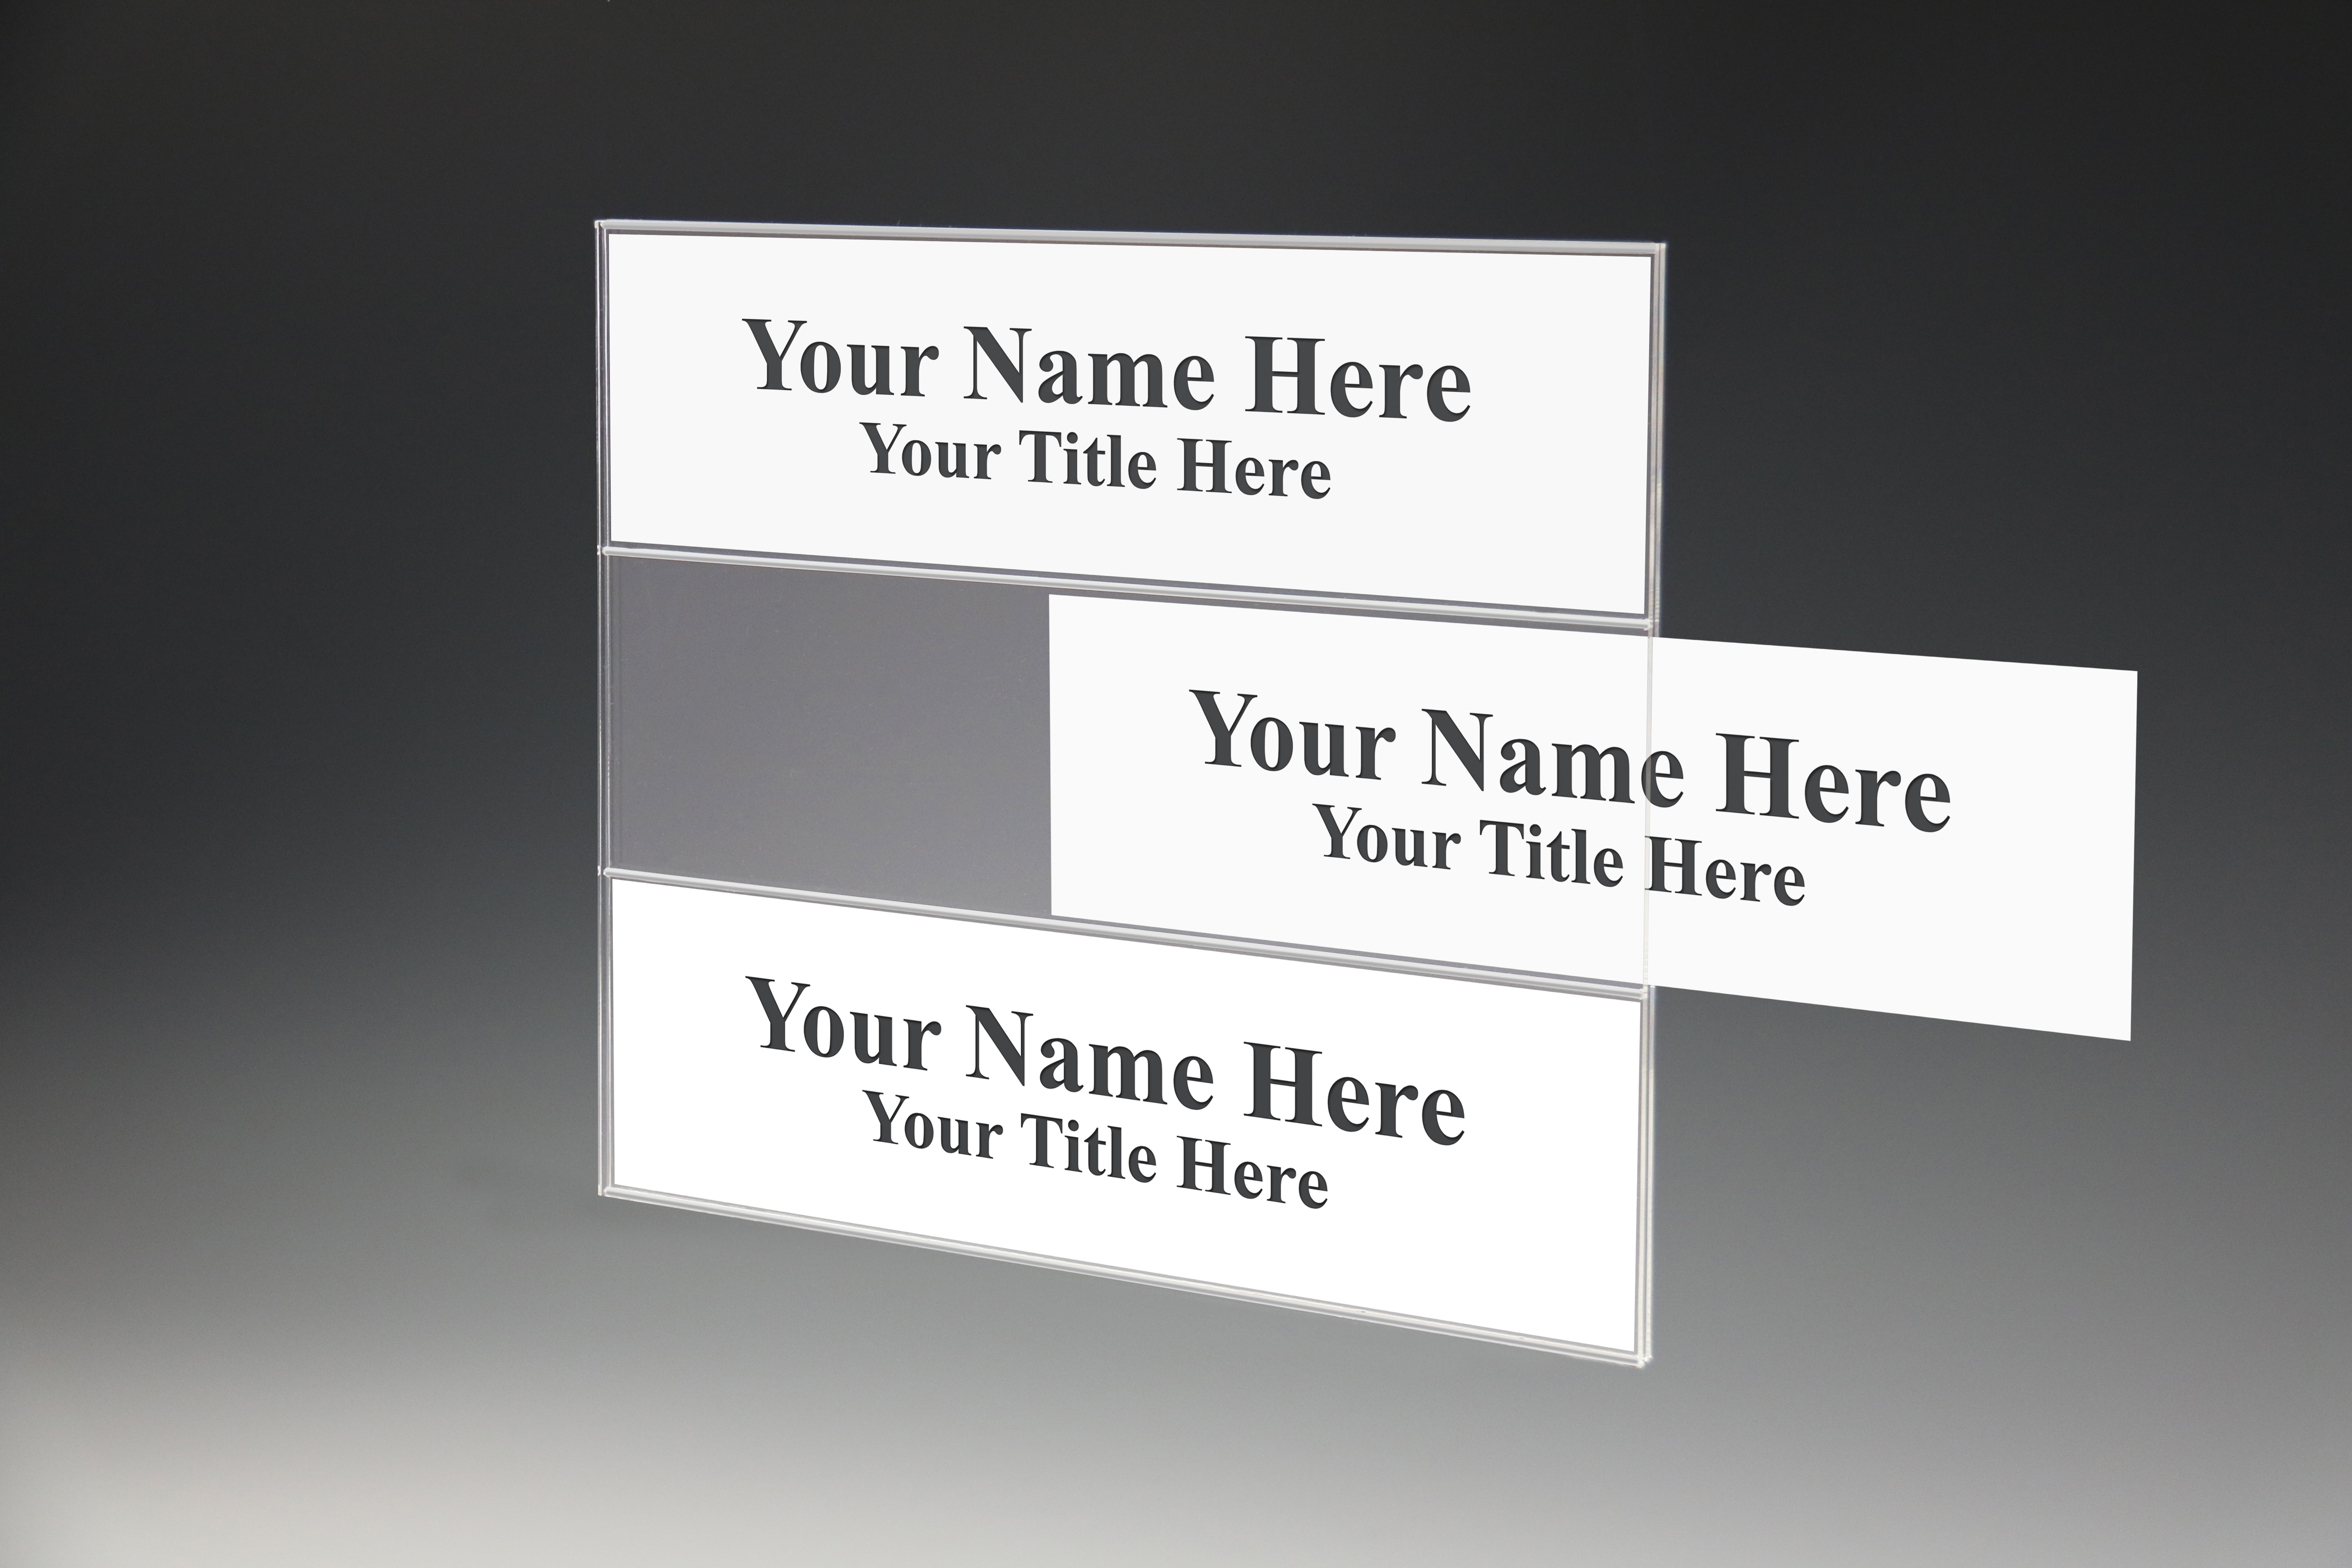 Acrylic Multi Tier Name Plate Holders For Cubicles Walls And Desks A New Release By Plastic Products Mfg